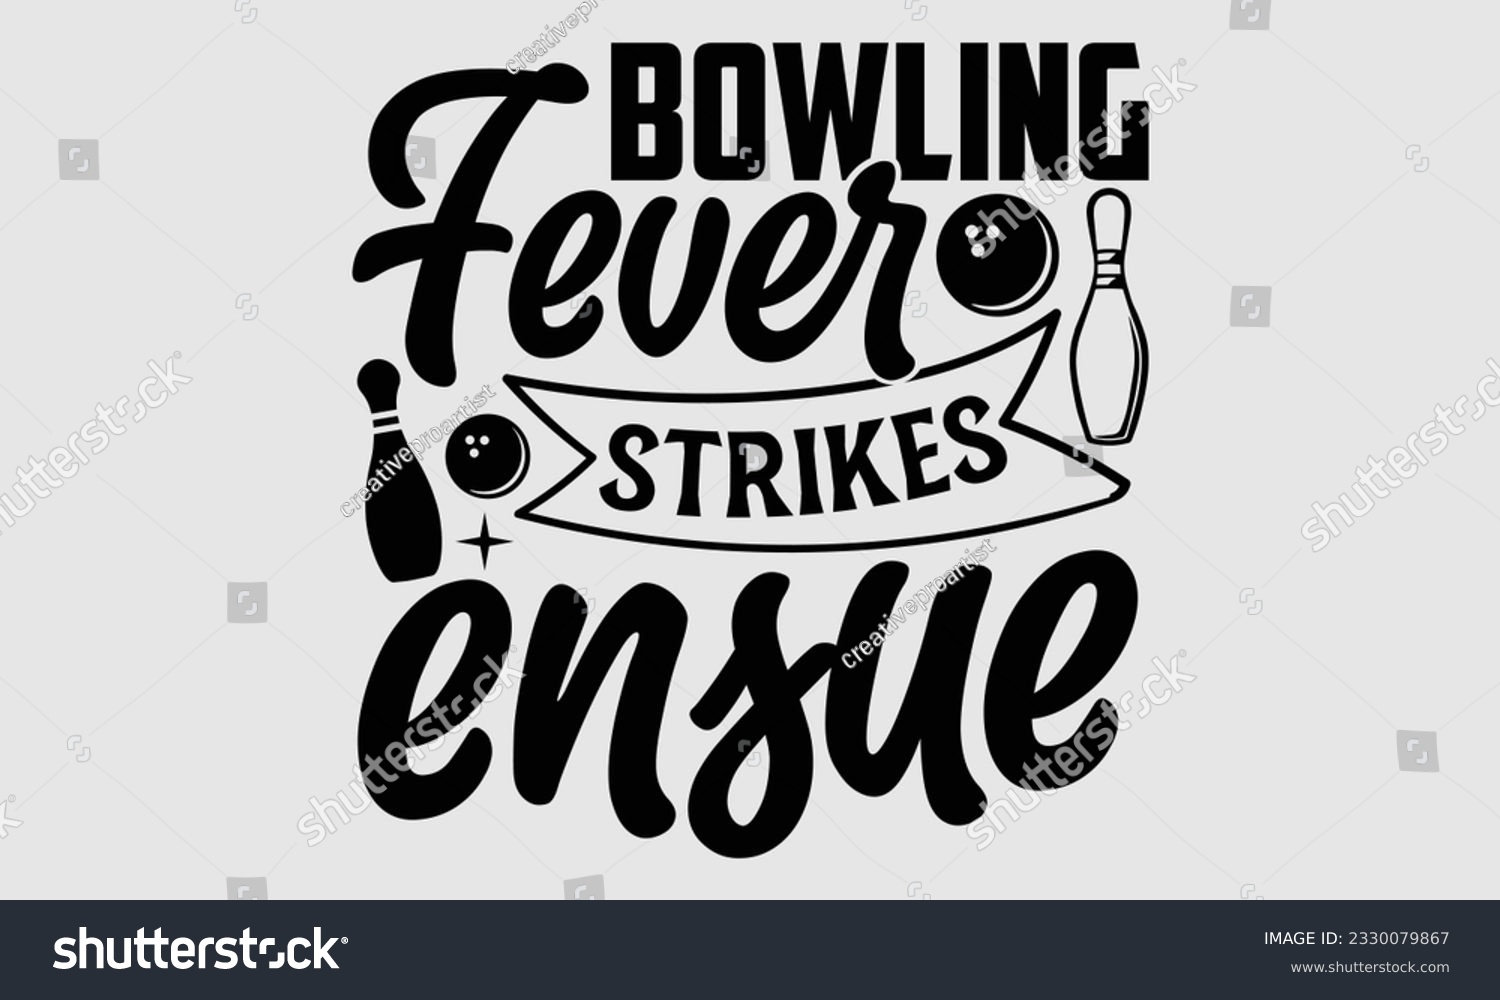 SVG of Bowling Fever Strikes Ensue- Bowling t-shirt design, Handmade calligraphy vector Illustration for prints on SVG and bags, posters, greeting card template EPS svg